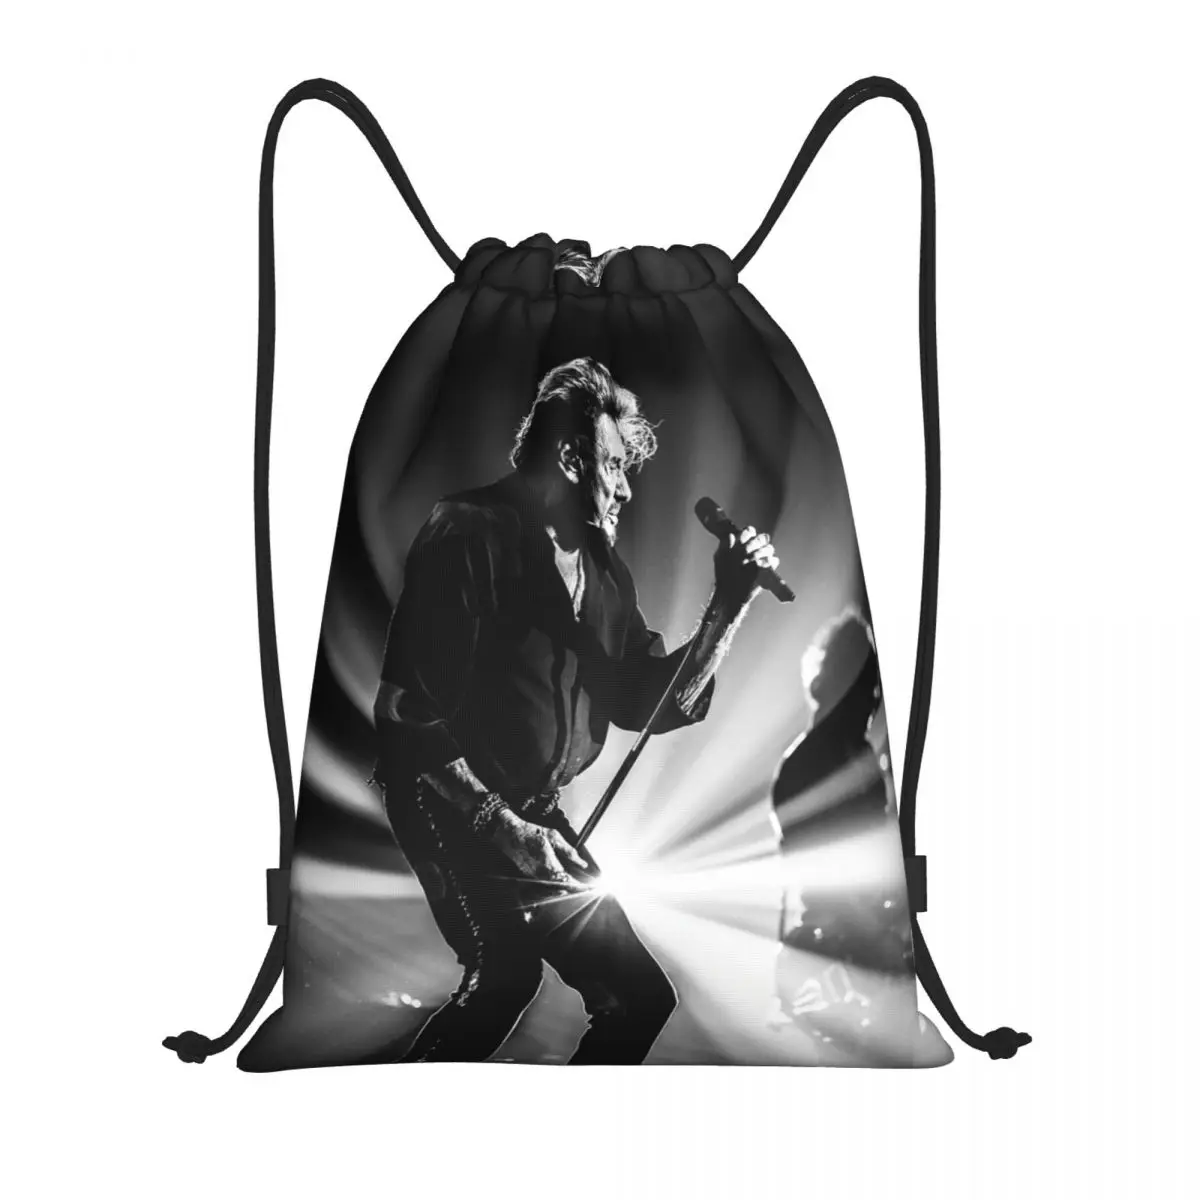 

Johnny And Hallyday Backpack Humor Infantry pack Drawstring Bags Gym Bag Graphic Vintage Durable